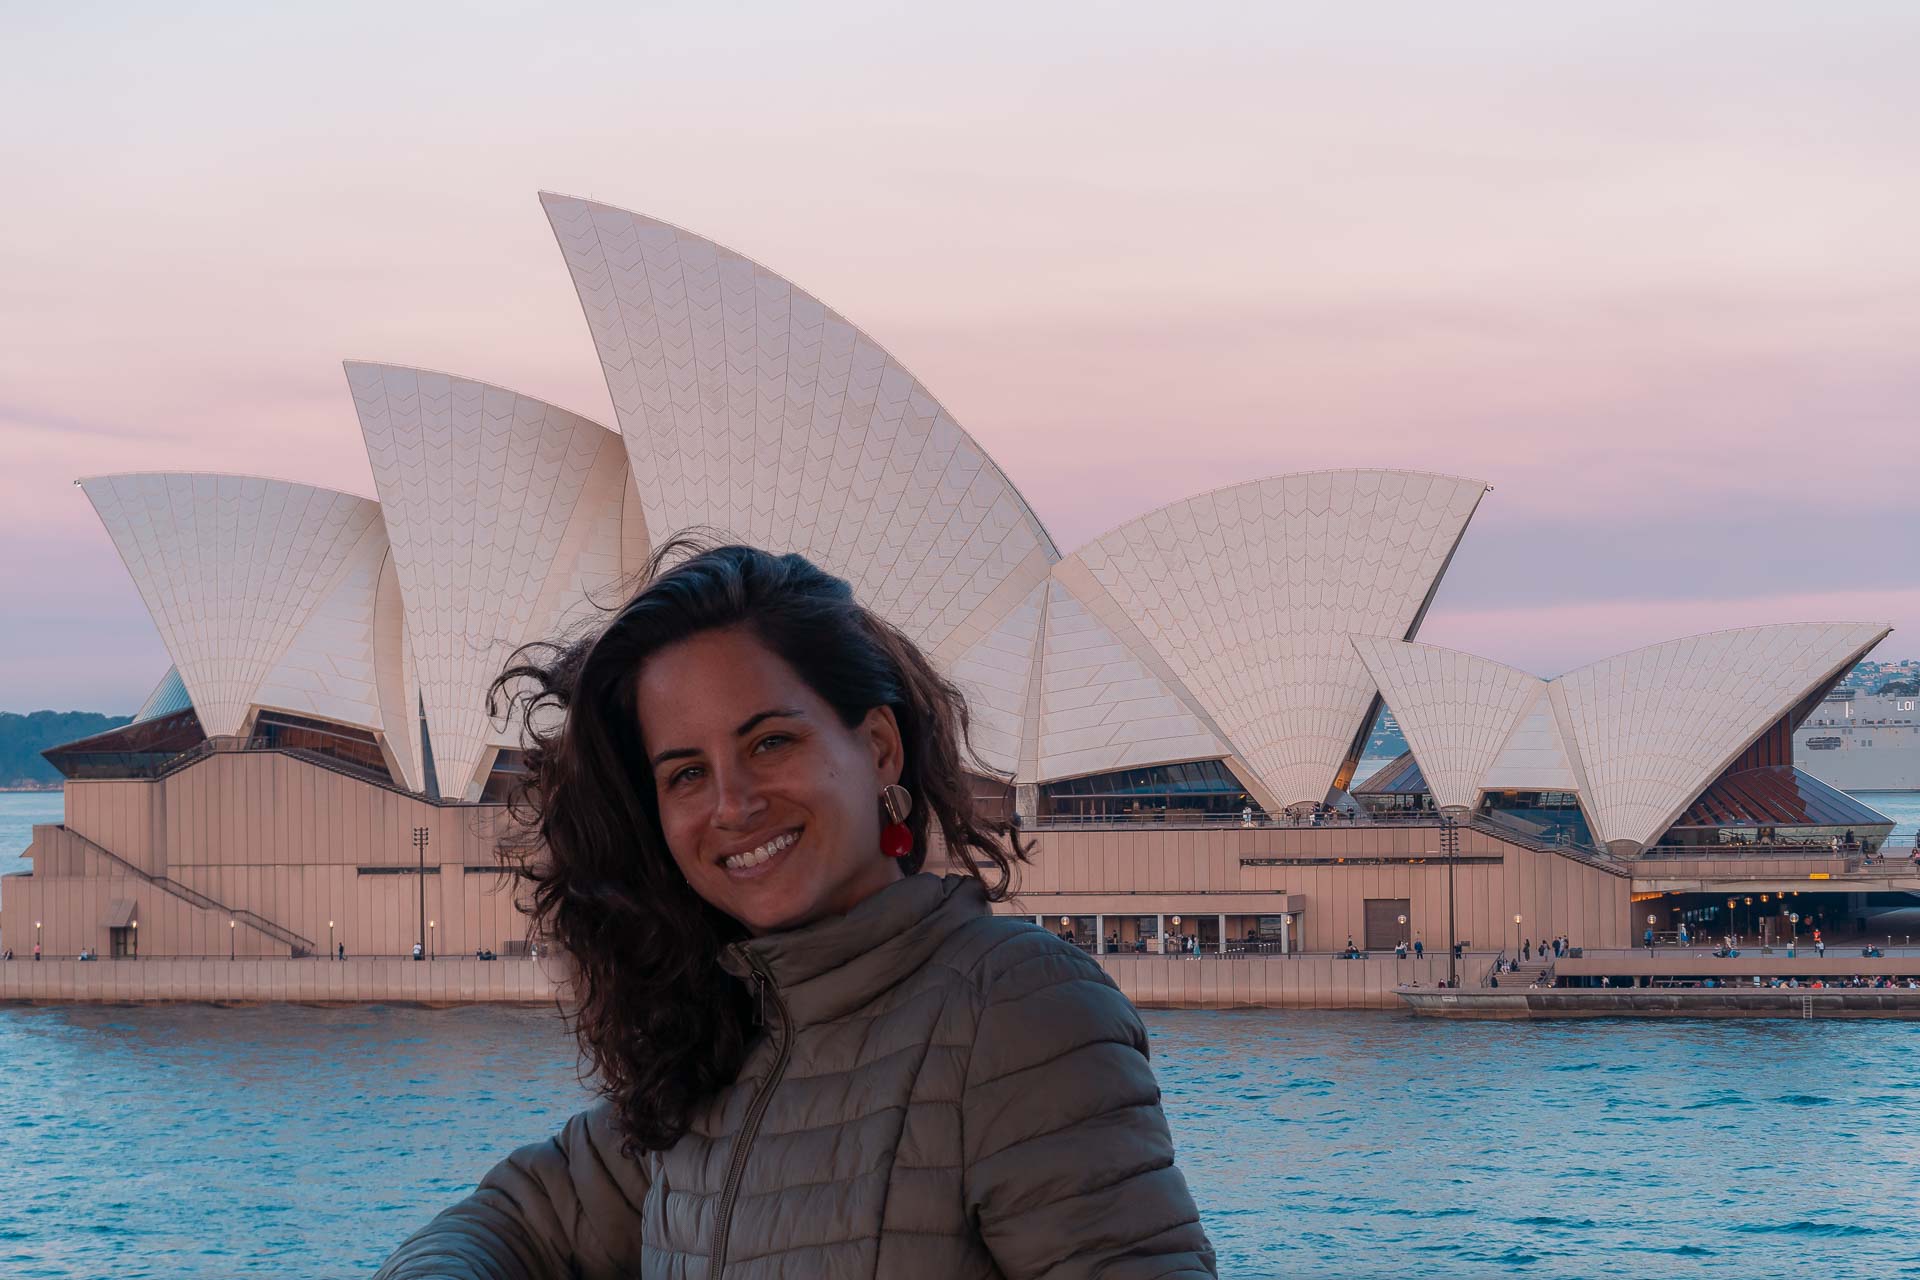 Fernanda and the Sydney Opera House in the background